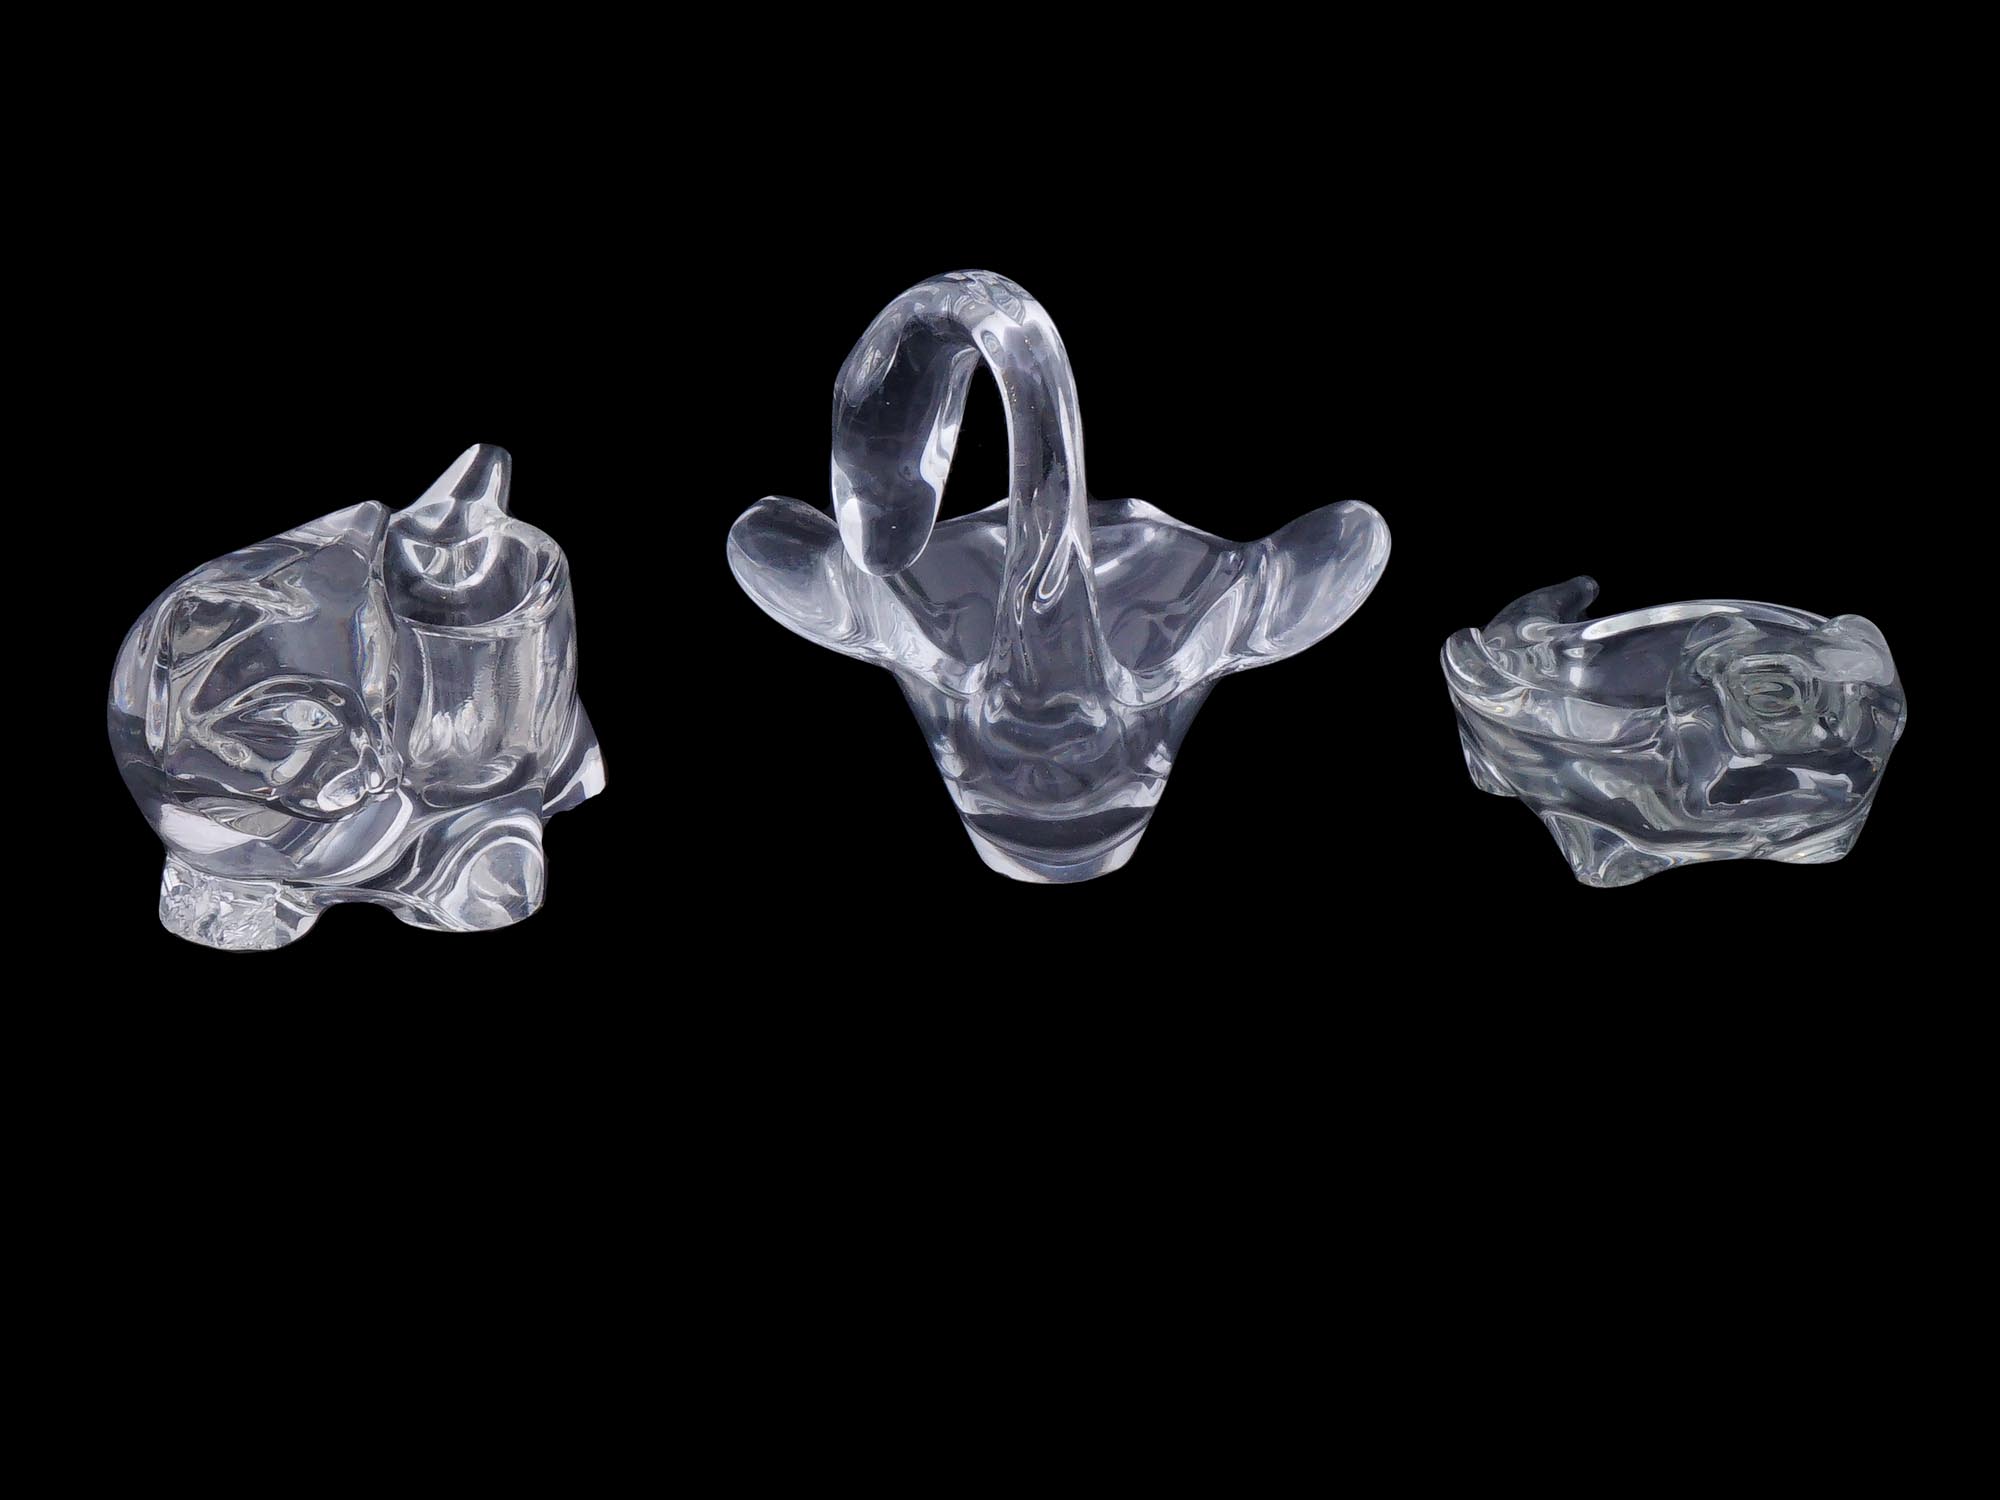 GROUP OF ANIMAL CUT GLASS SCULPTURAL CANDY DISH PIC-0